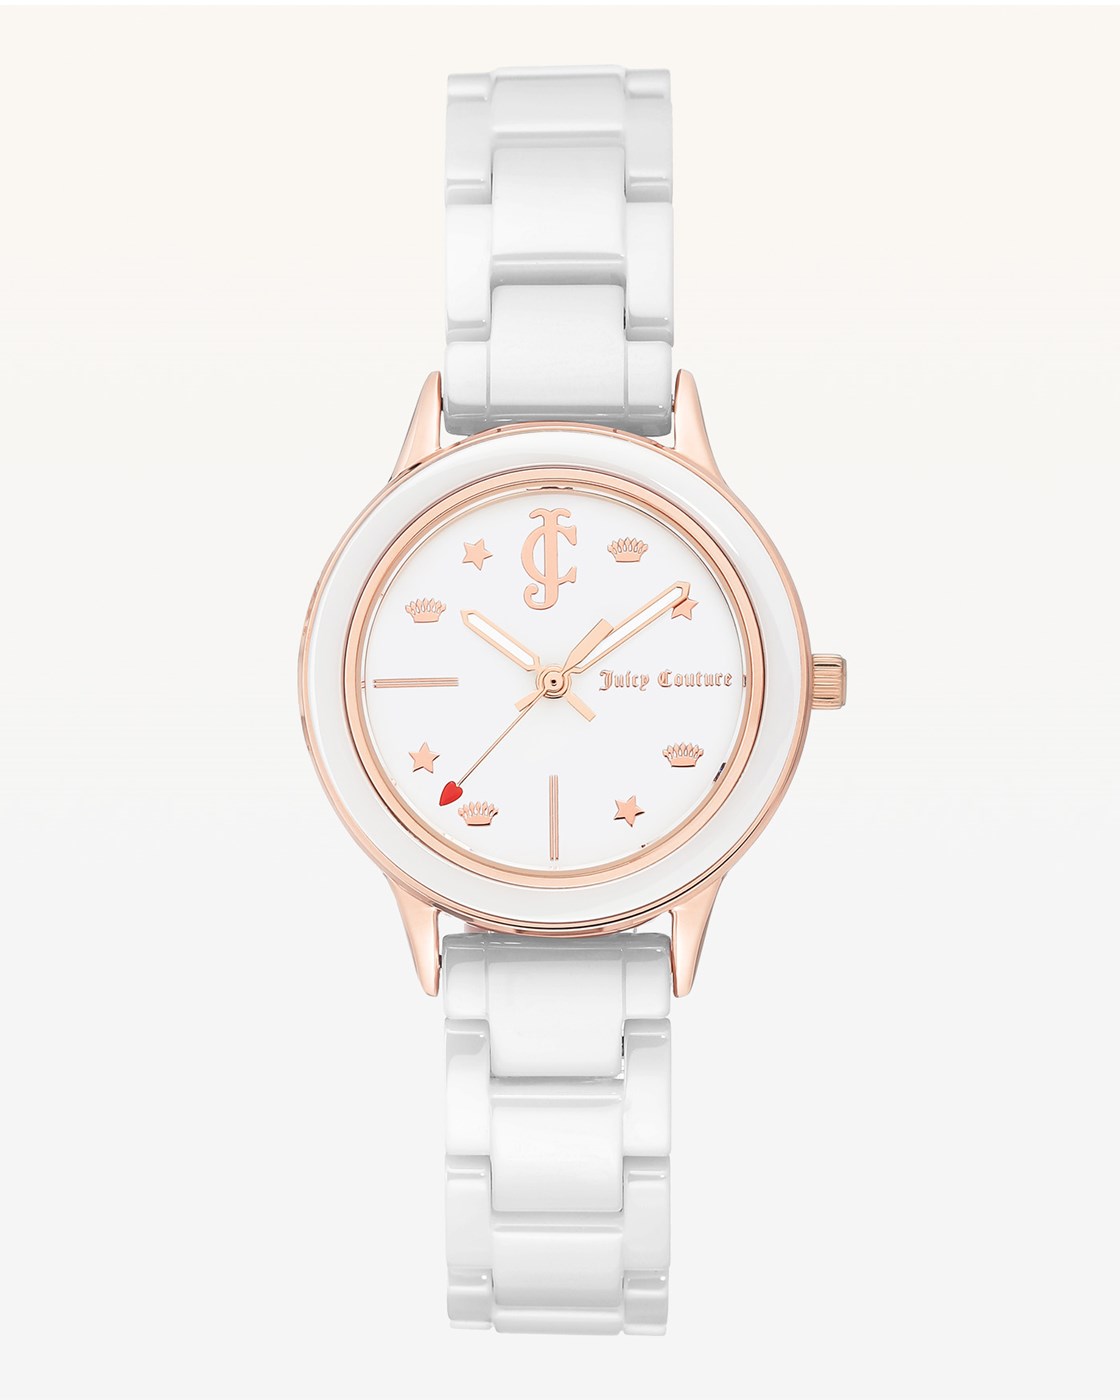 Juicy Couture JC White Ceramic Watch